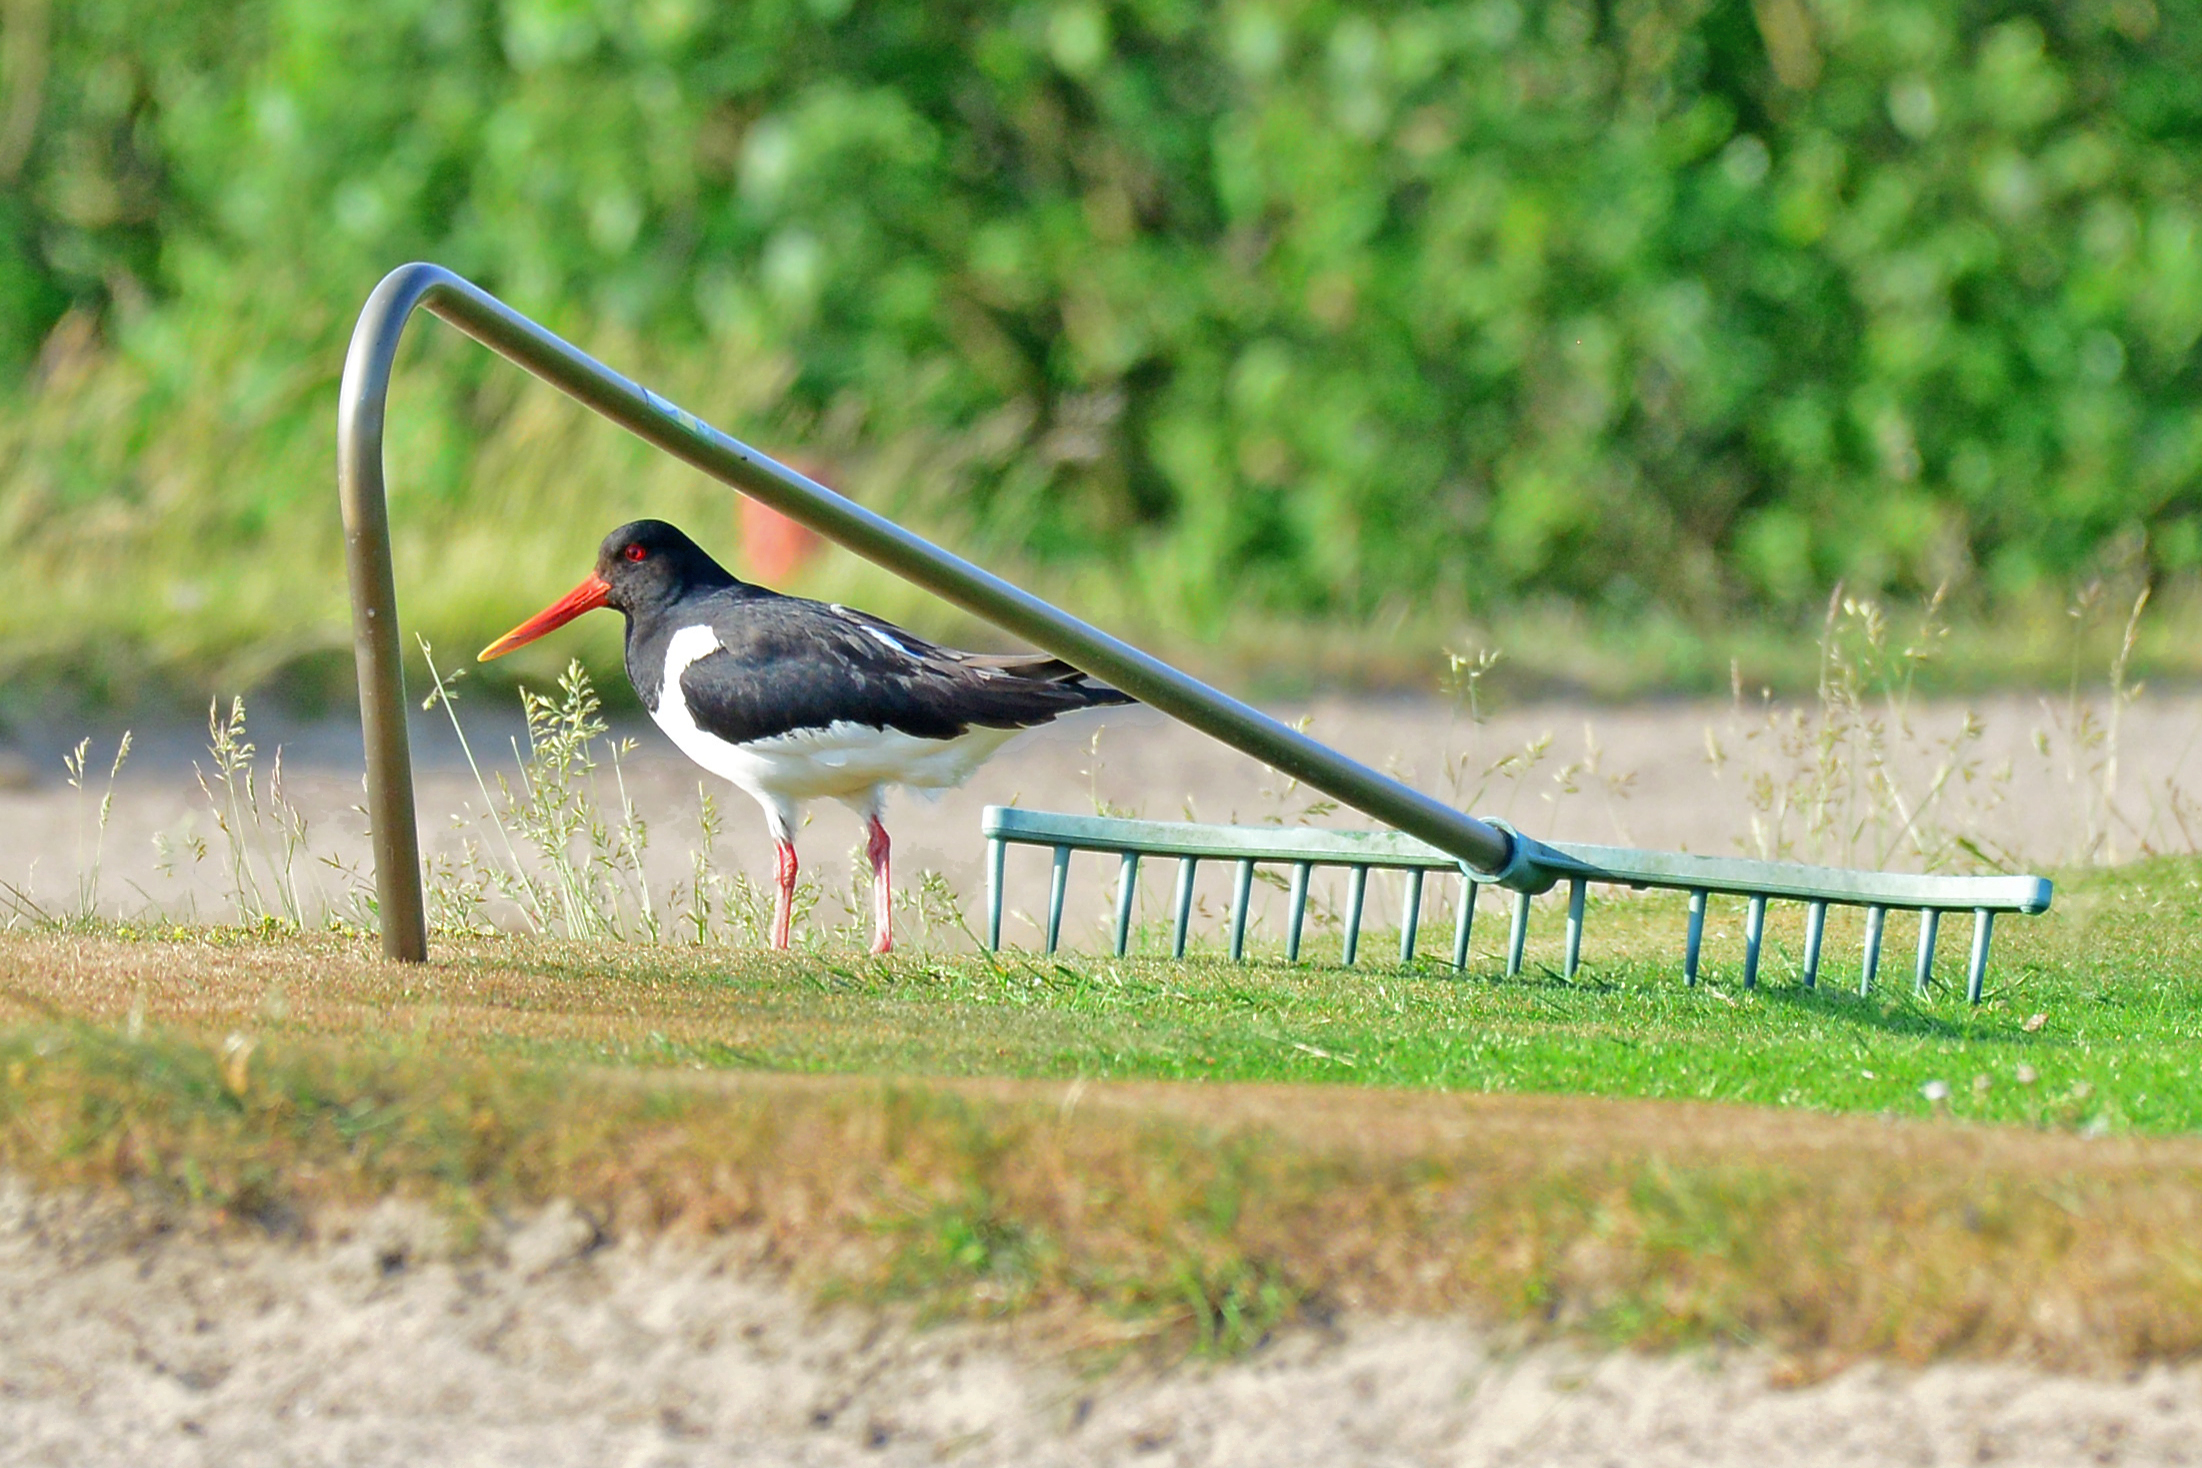 An oystercatcher walks next to a bunker rake along a golf bunker and demonstrates, who big is biodiversity on golf courses in Schleswig-Holstein